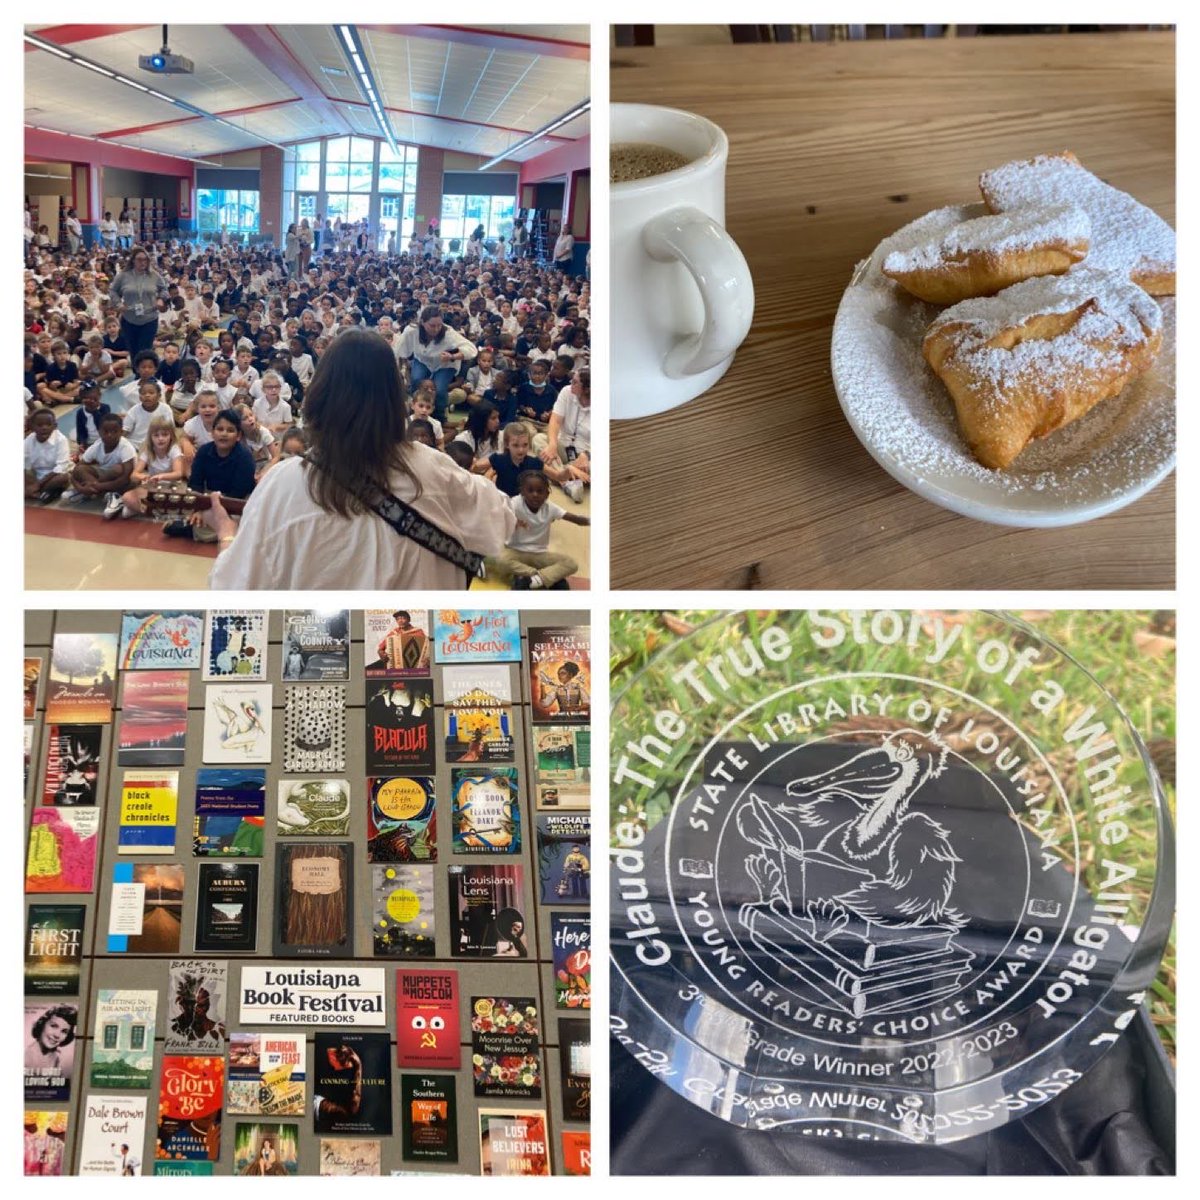 Home from 6 days in Louisiana celebrating books! CLAUDE was feted as winner of the Young Readers Award. But the real reward was getting to visit 8 schools and libraries in New Orleans and Baton Rouge. Thank you, Louisiana! ❤️ @LBFbooks @StormLiterary @jennifermpotter @LABookFest